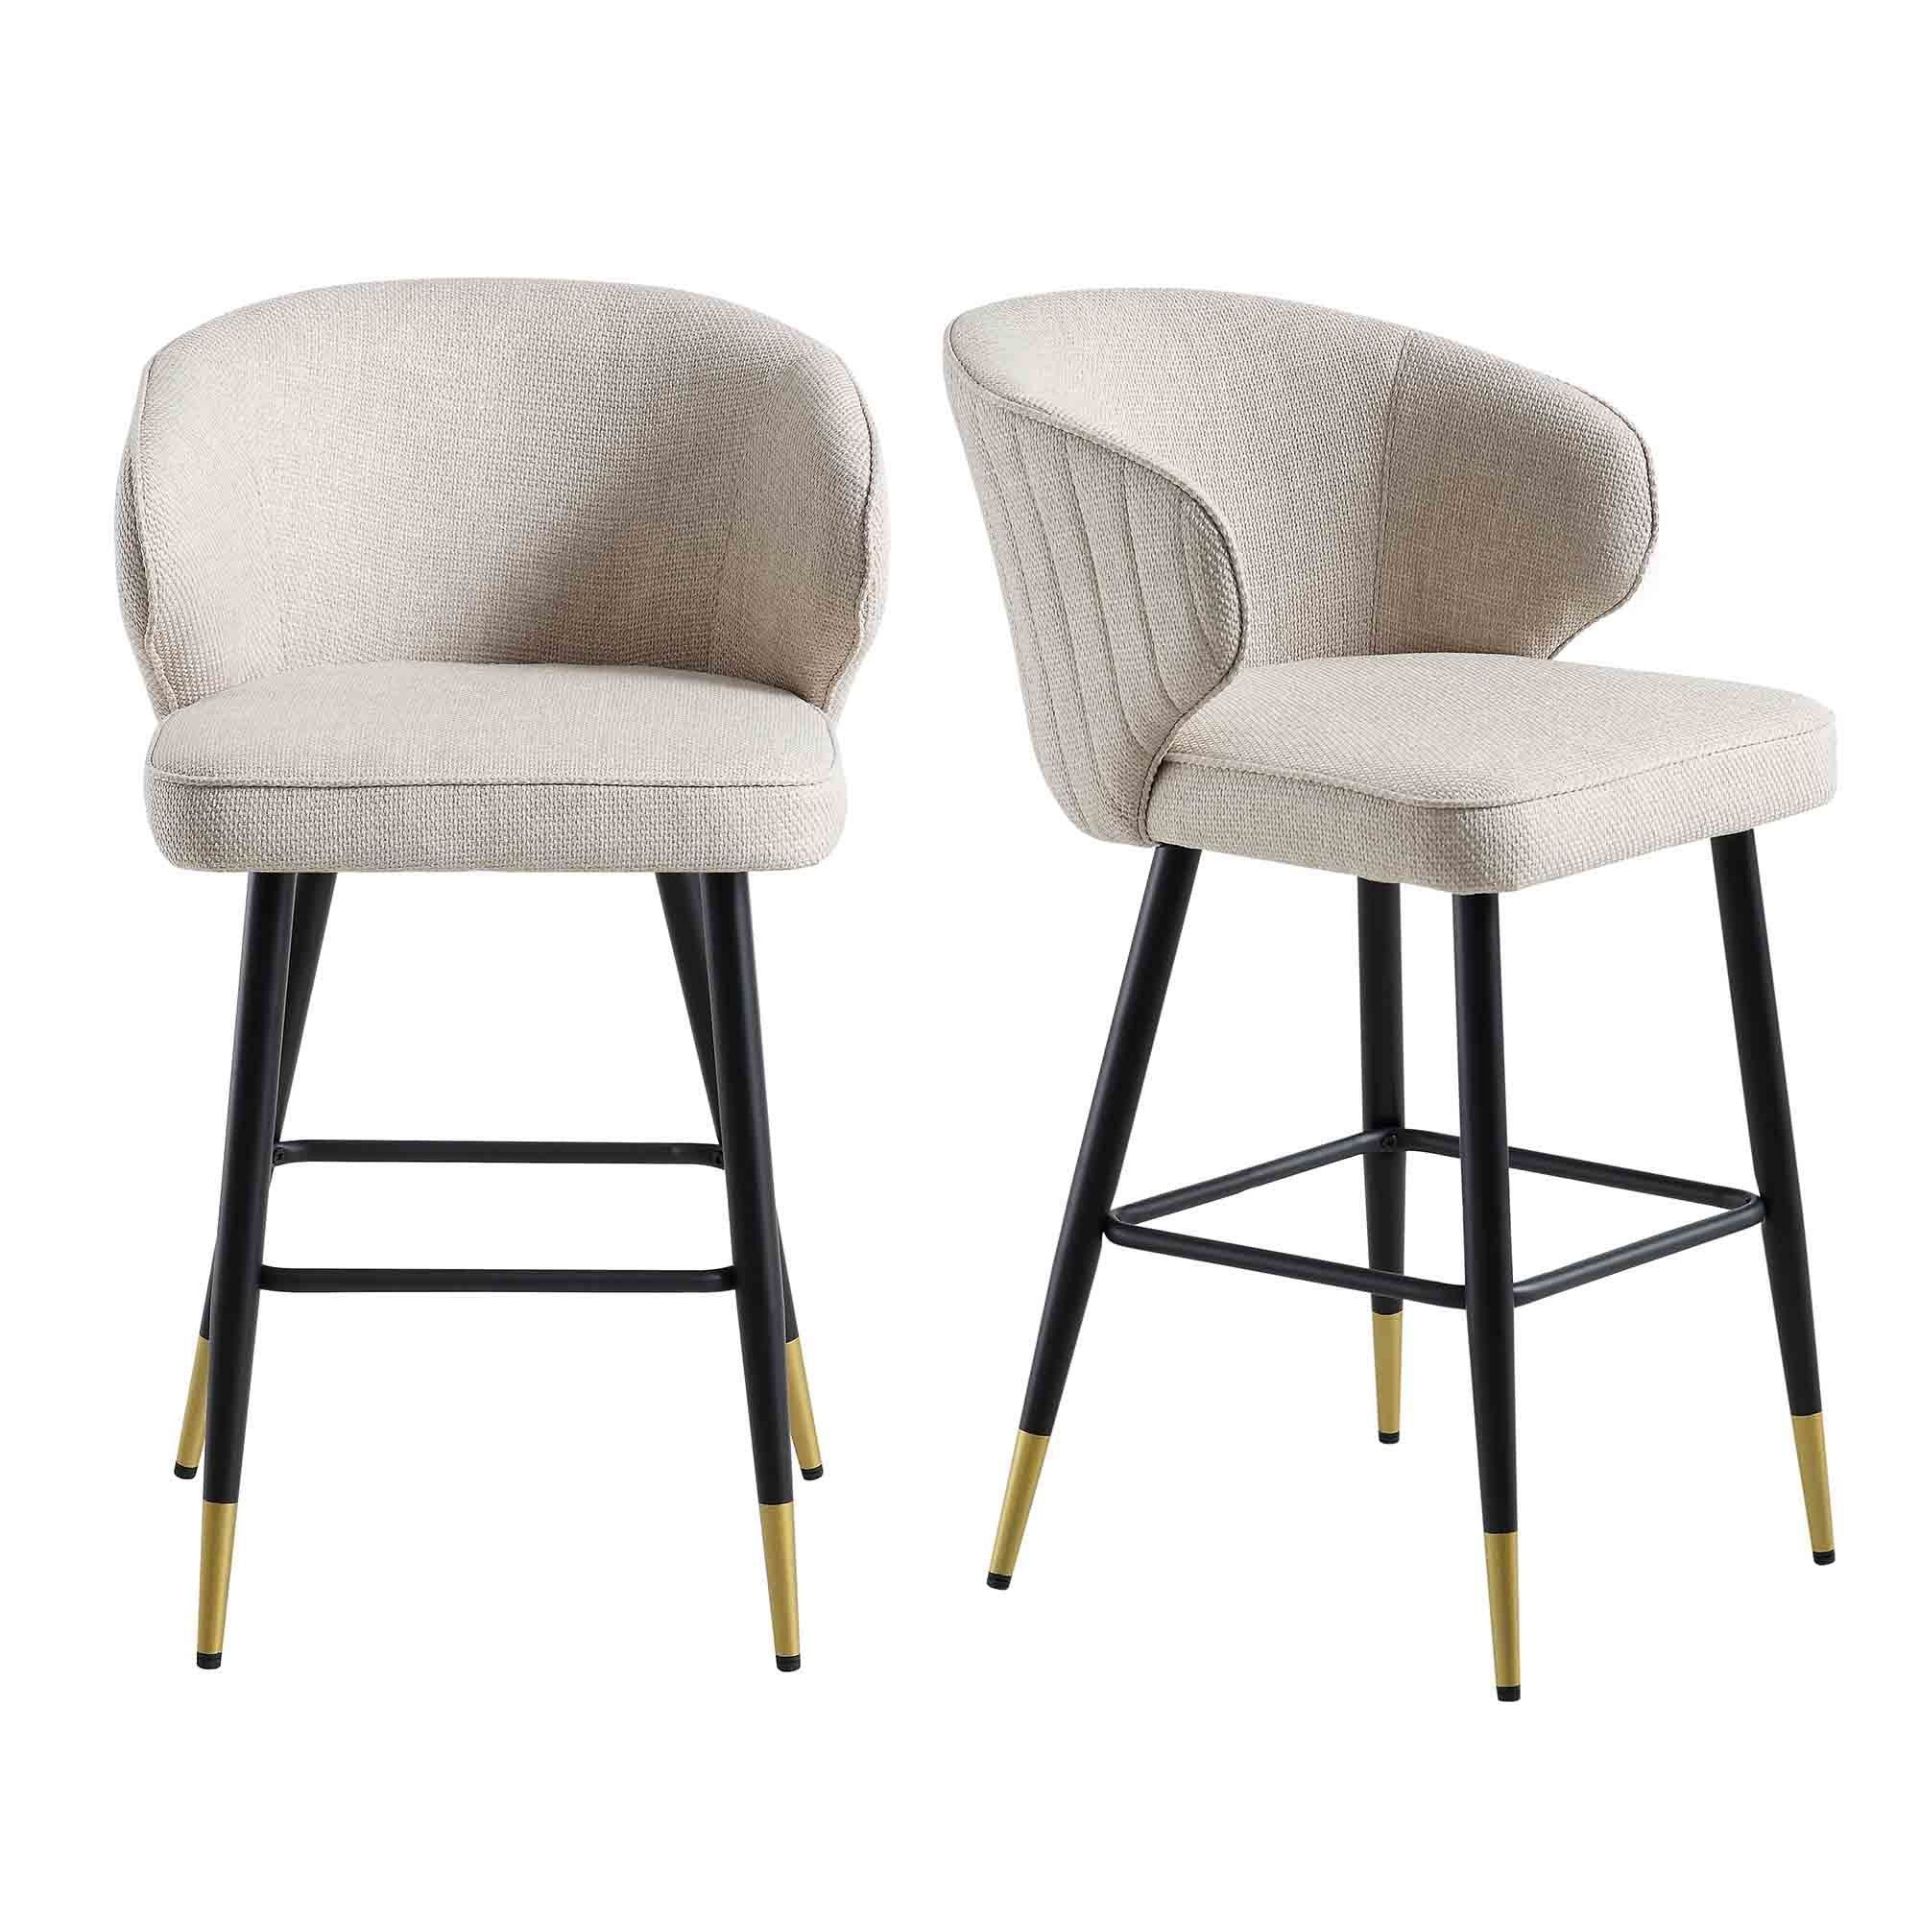 Langham Set of 2 Oatmeal Woven Fabric Upholstered Carver Counter Stools. - Er30. RRP £289.99. - Image 2 of 2